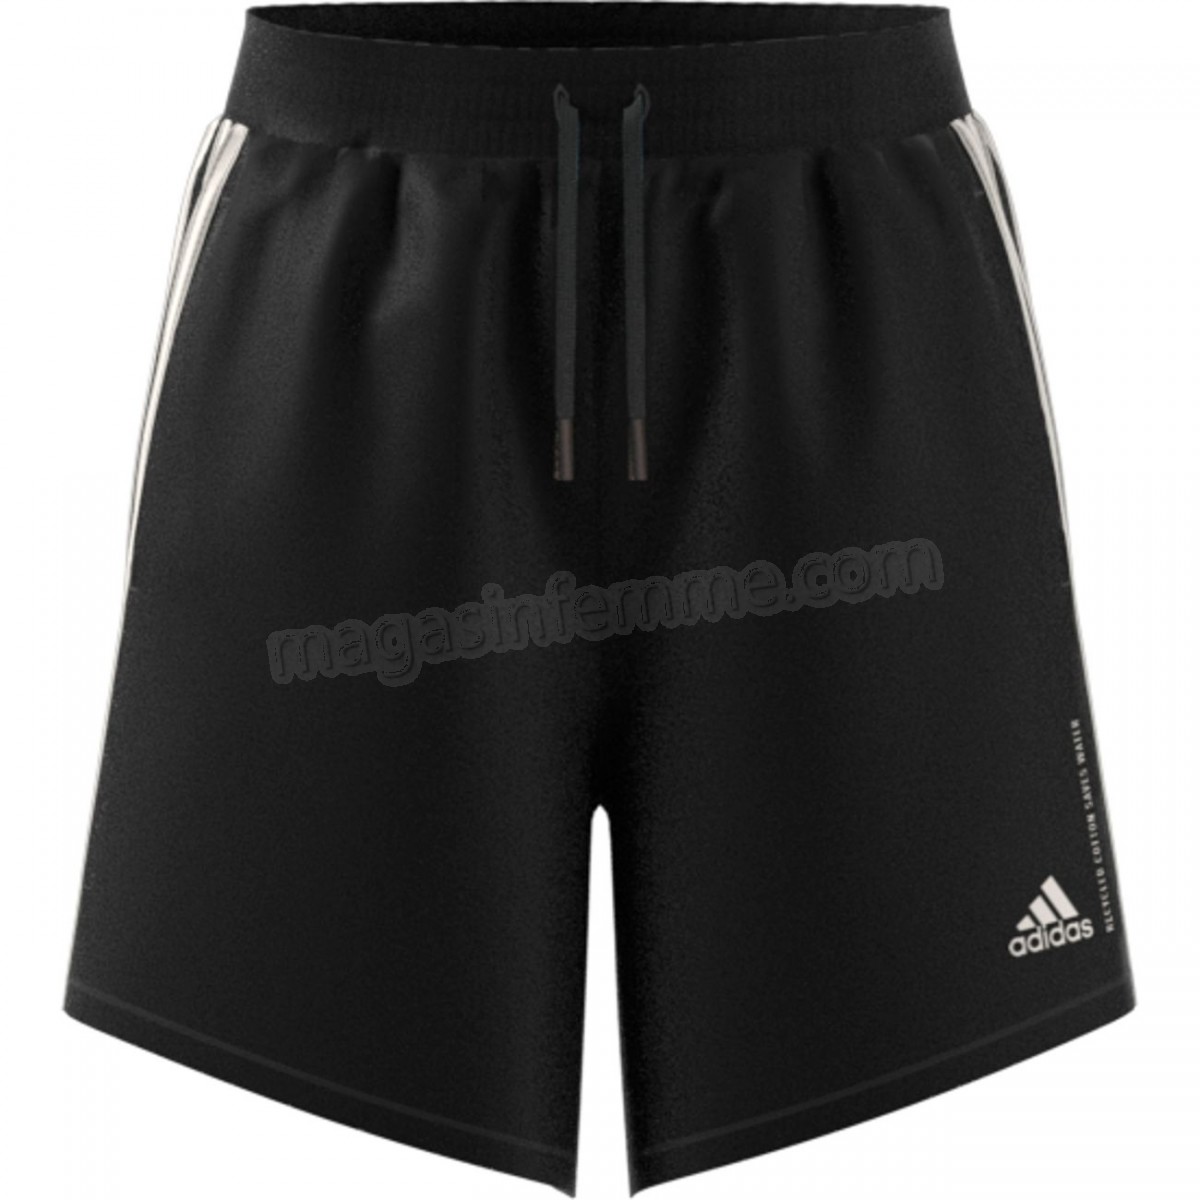 Adidas-Fitness femme ADIDAS Short femme adidas Must Haves Recycled Cotton en solde - -3